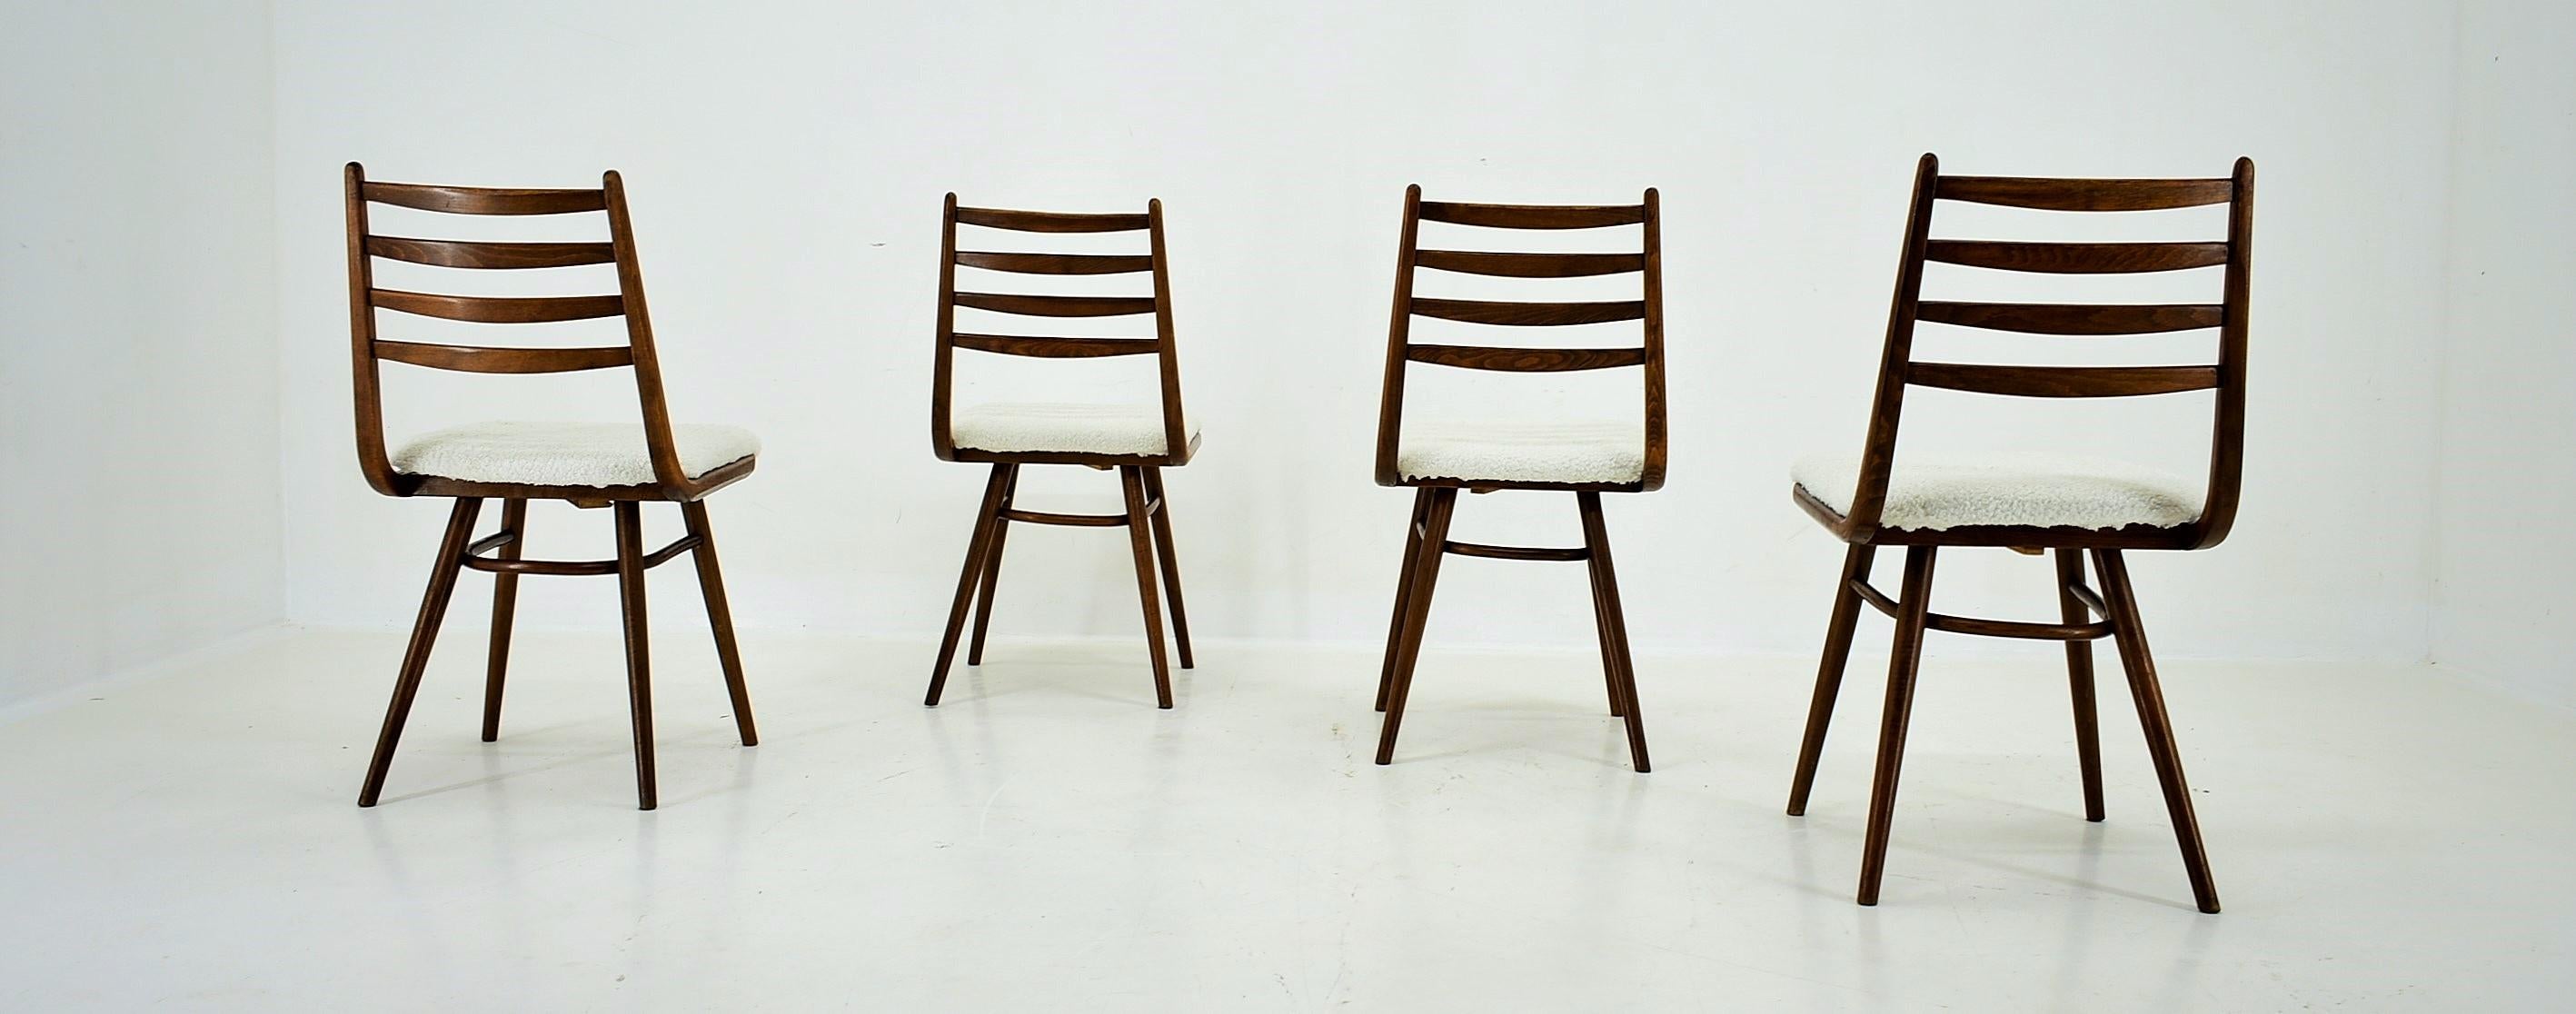 1960s Set of Four Dining Bentwood Chairs by Ton, Czechoslovakia For Sale 3